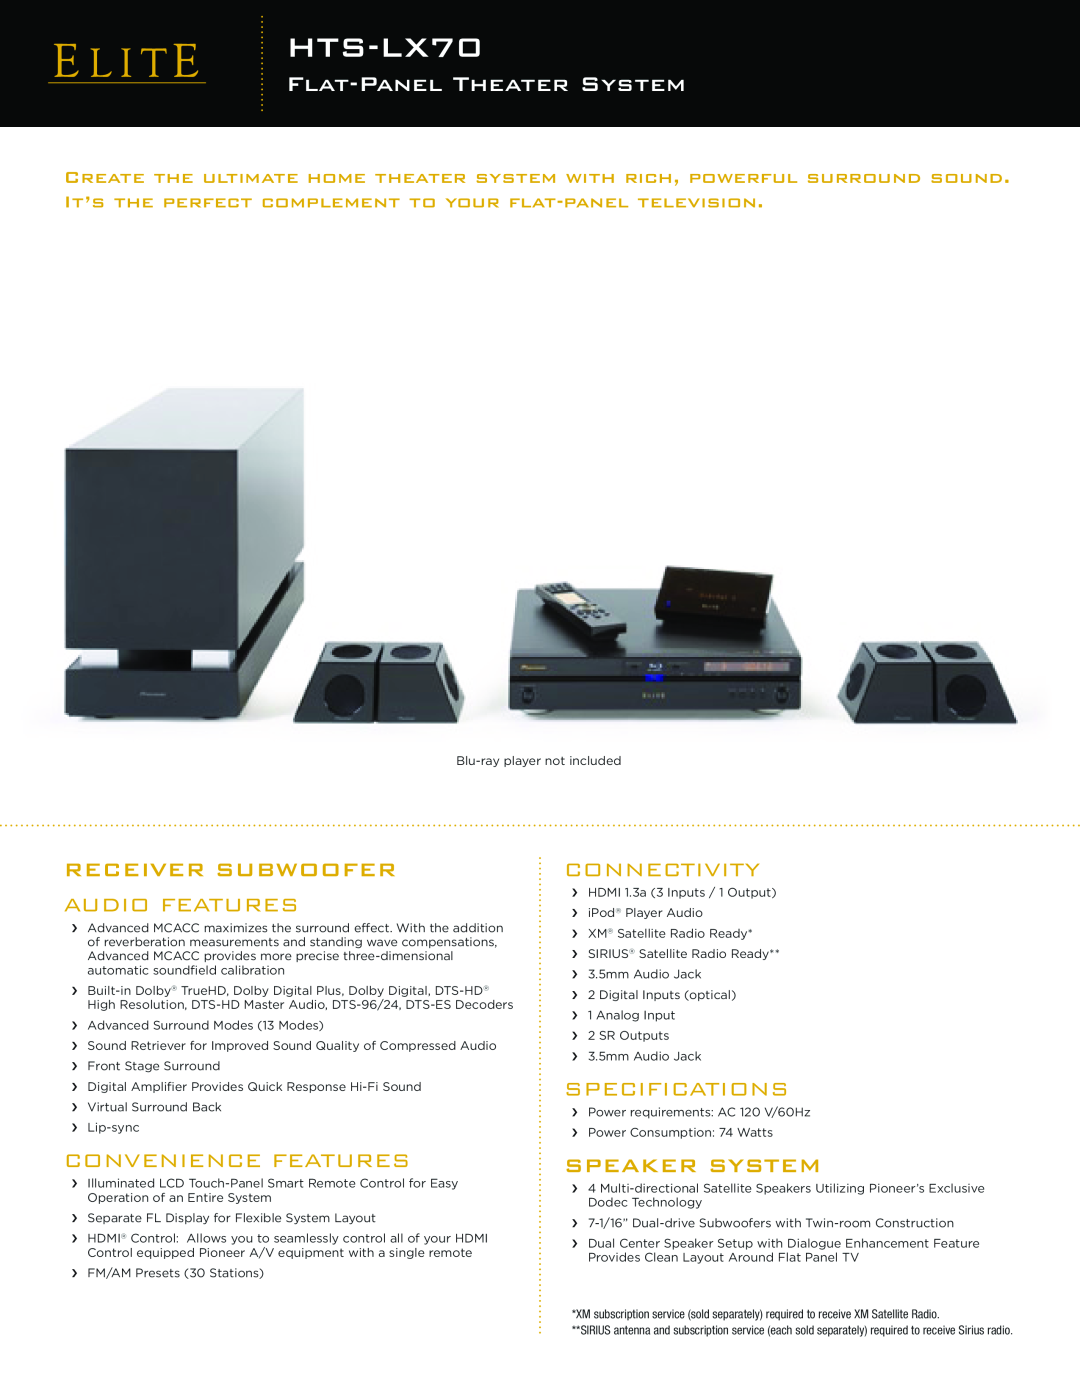 Elite HTS-LX70 specifications Receiver Subwoofer Audio Features, Convenience Features, Speaker System, Connectivity 